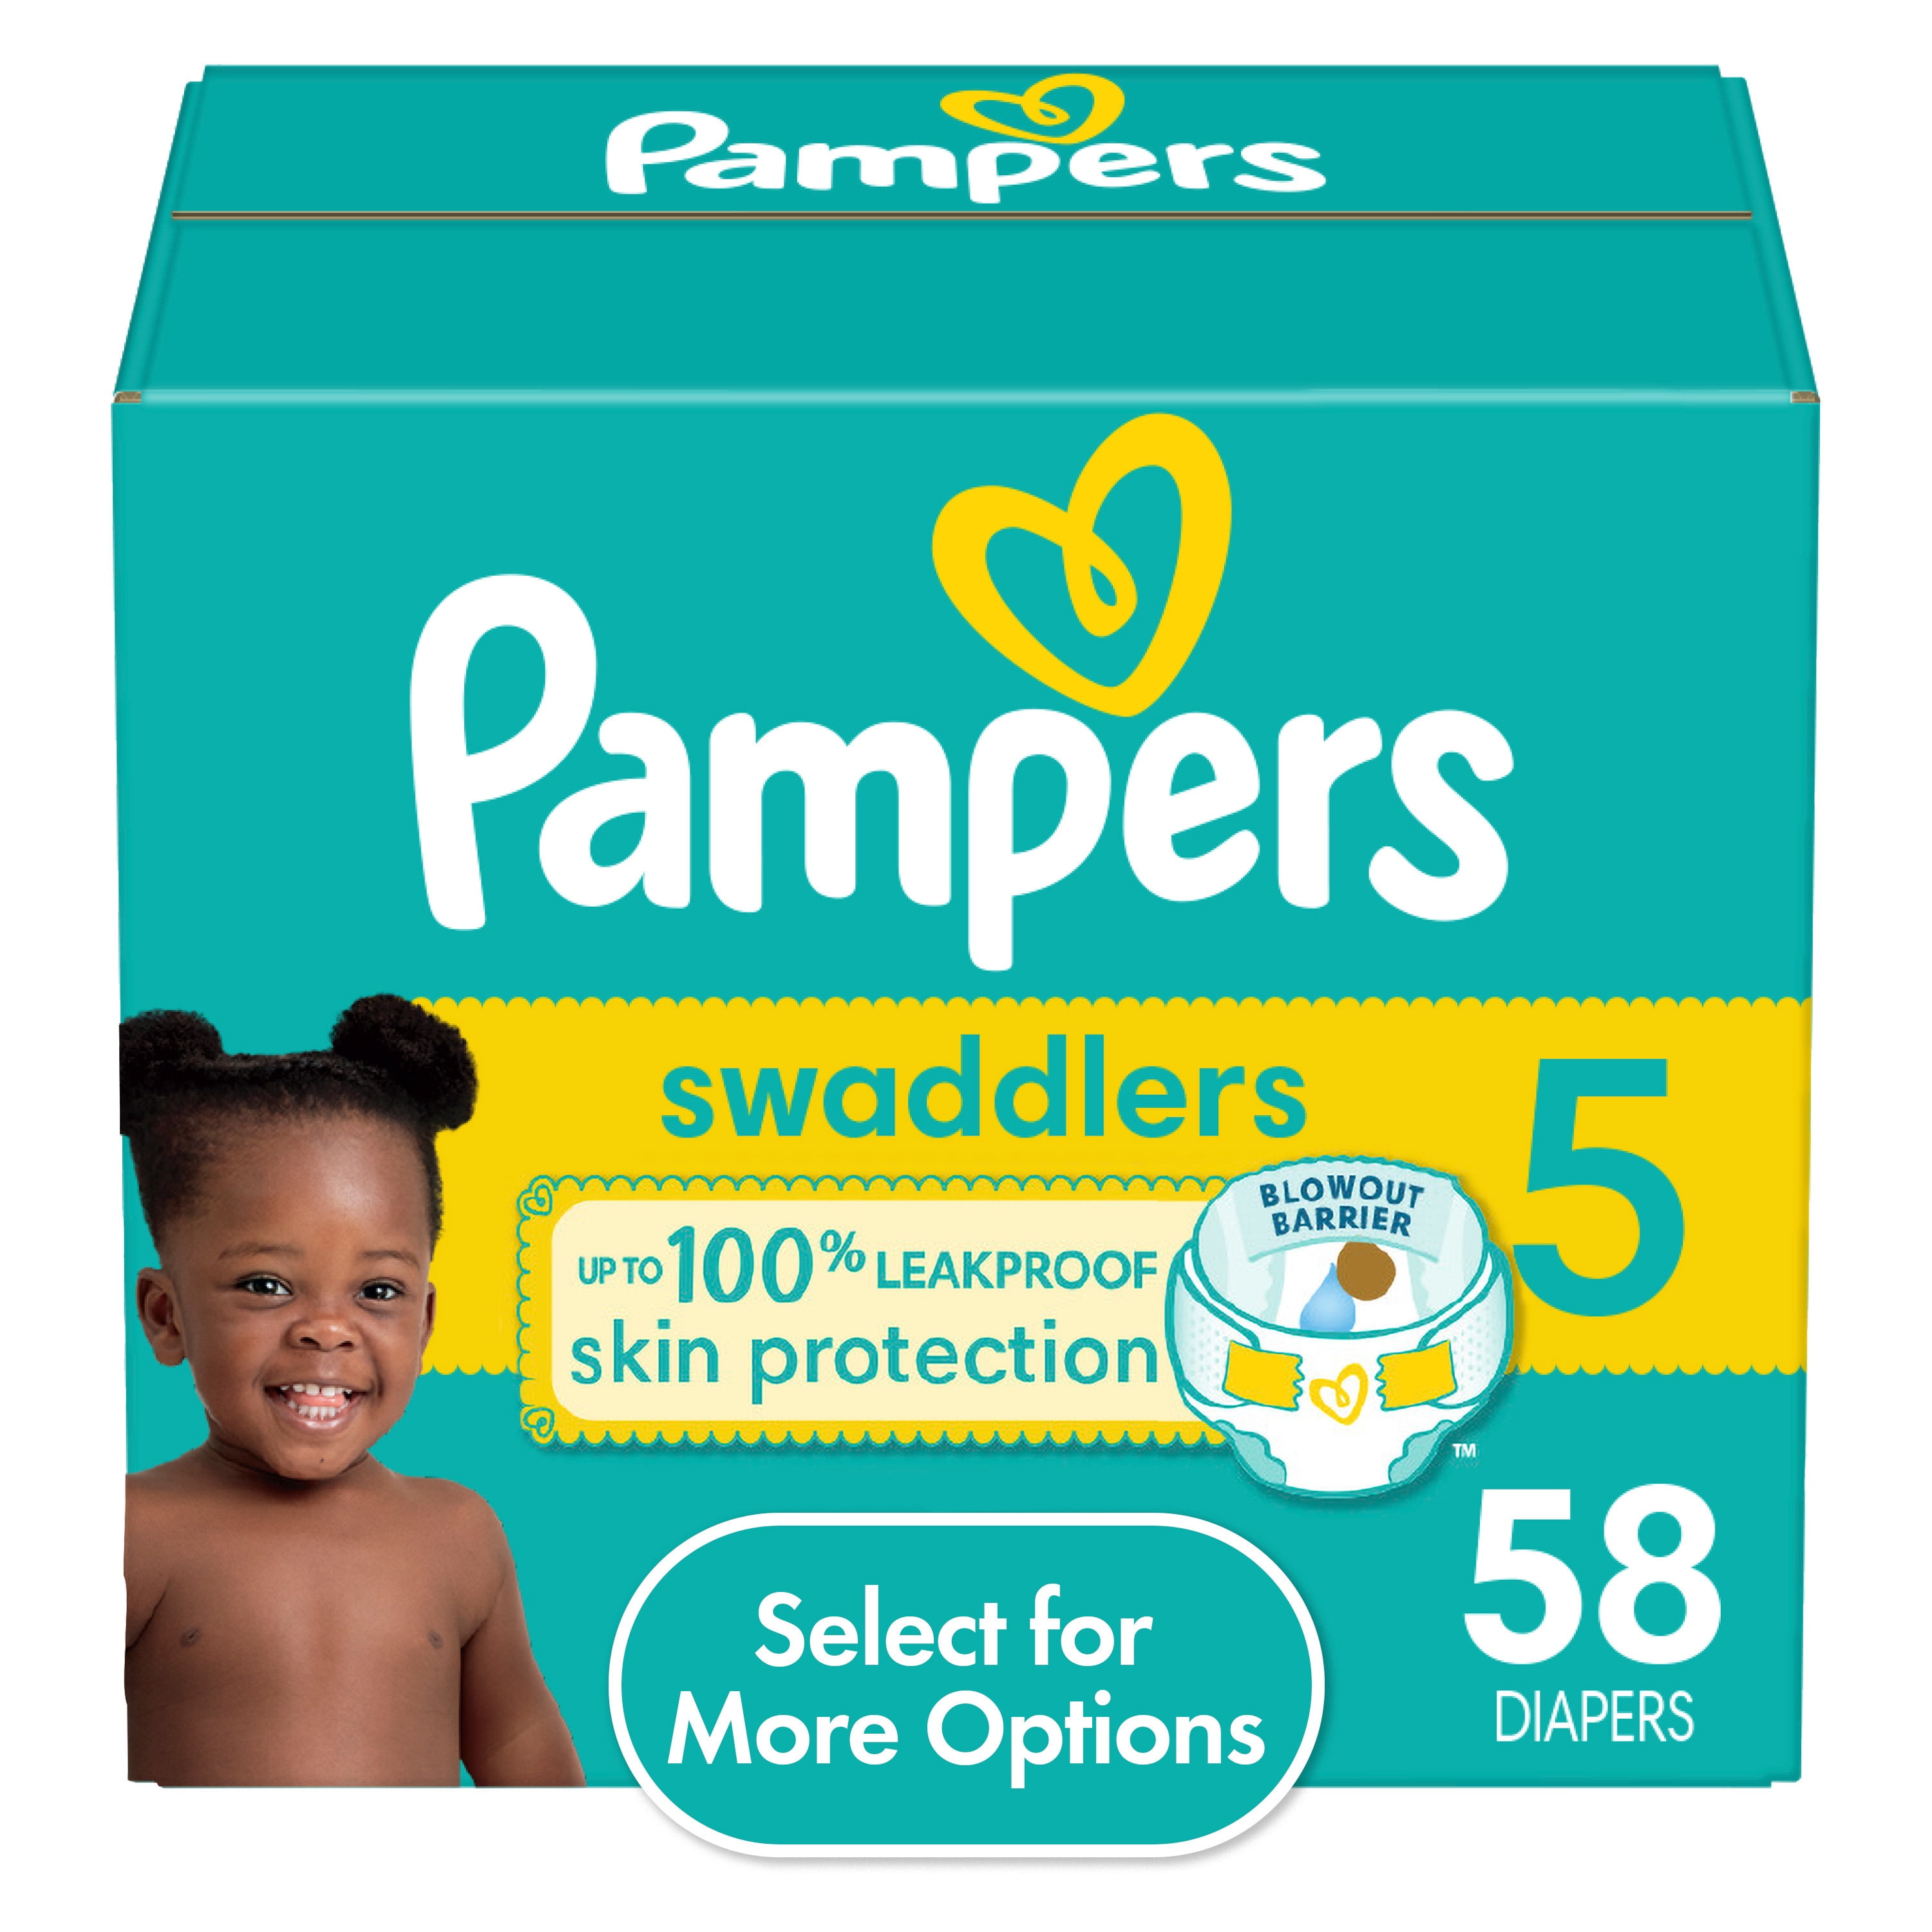 Pampers Swaddlers Diapers, Size 5, 58 Count (Select for More Options)